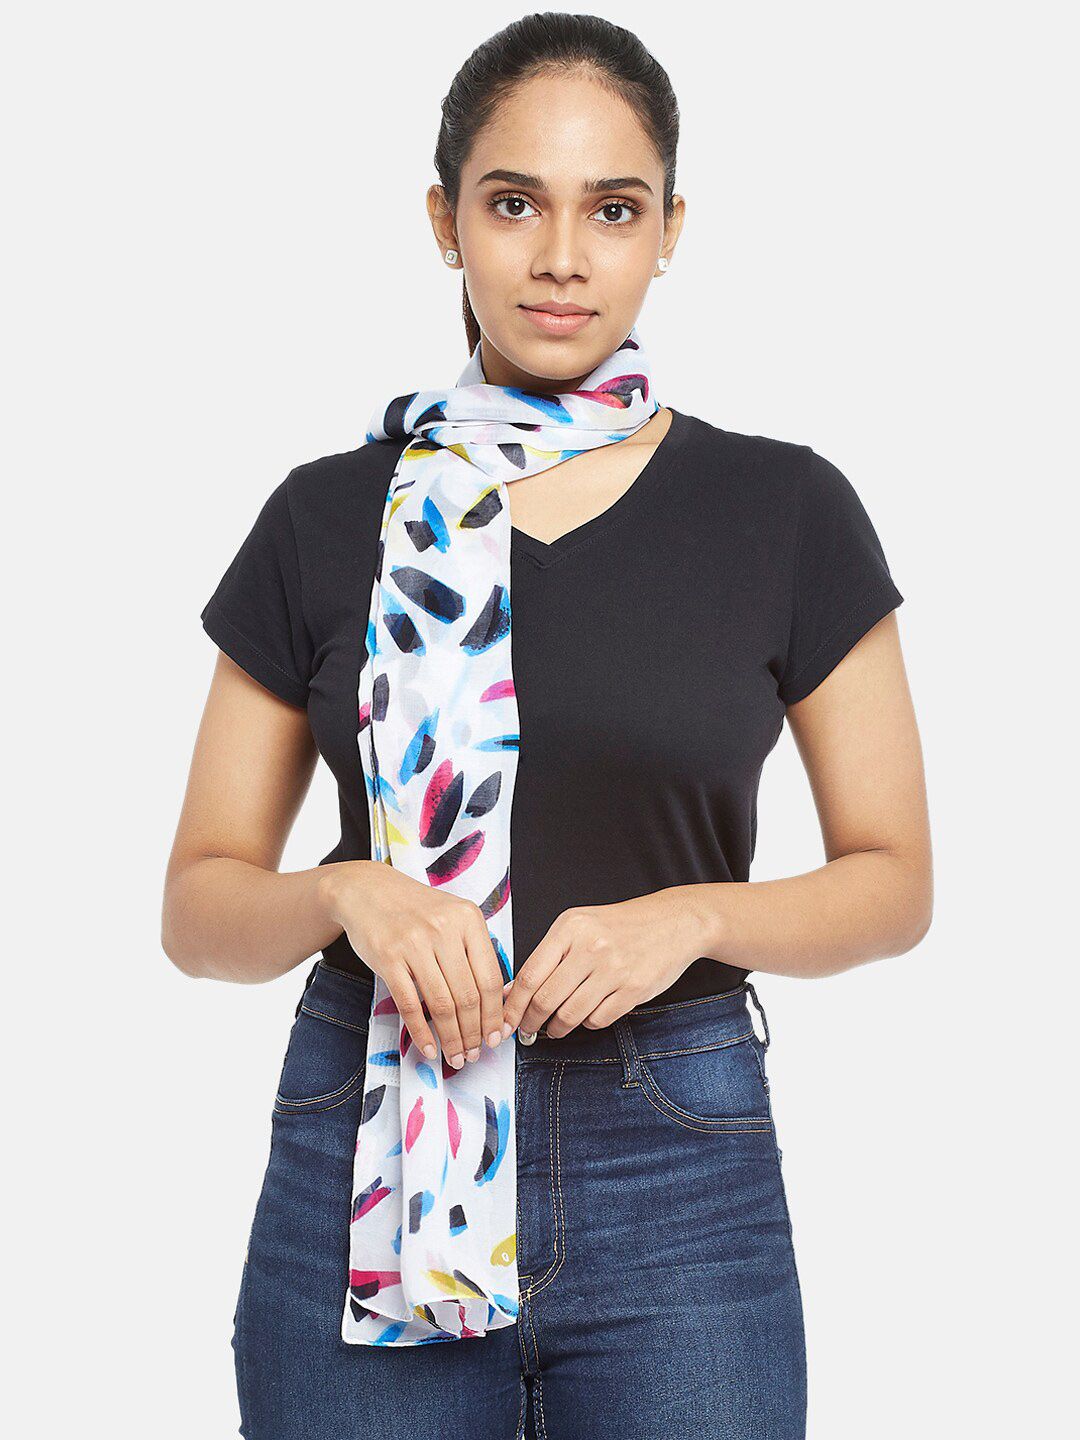 Honey by Pantaloons Women White & Multicoloured Printed Scarf Price in India